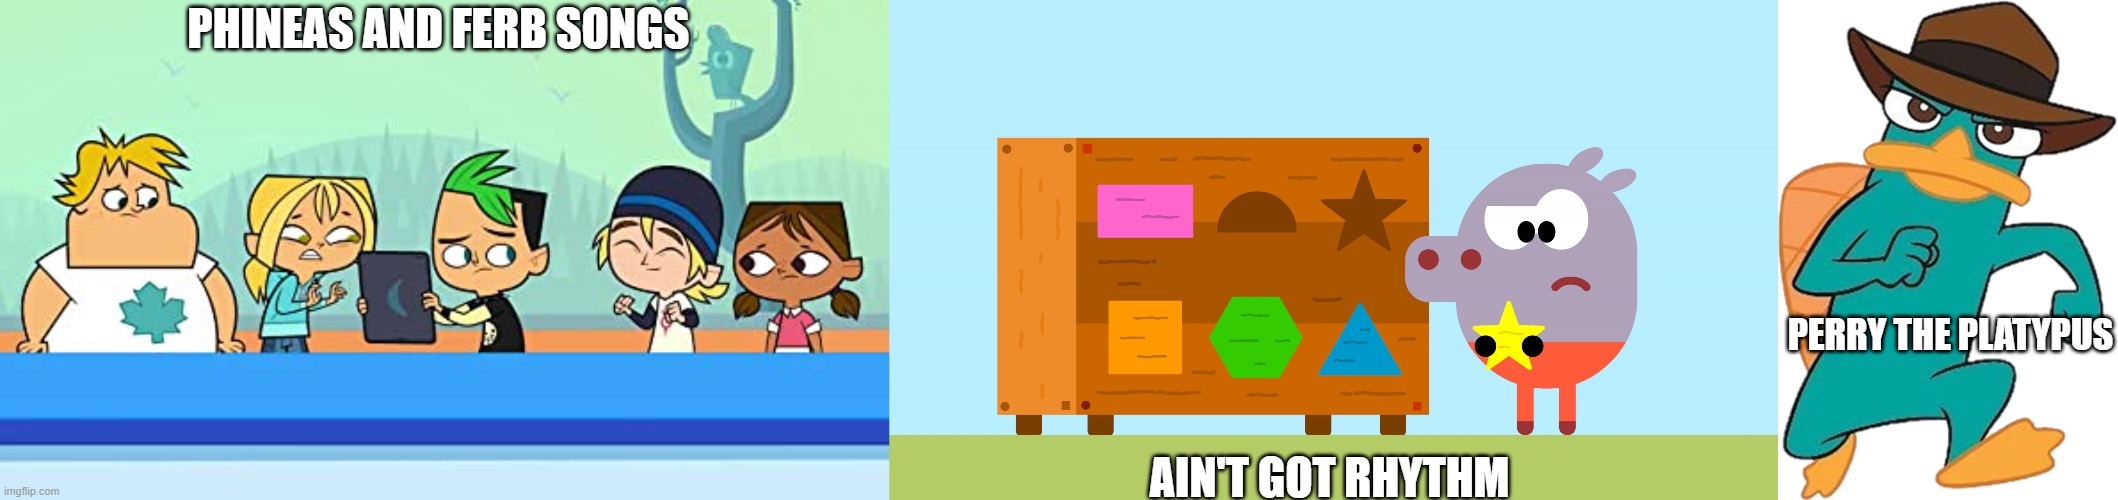 Phineas and Ferb Songs Ain't Got Rhythm | PHINEAS AND FERB SONGS; PERRY THE PLATYPUS; AIN'T GOT RHYTHM | image tagged in bridgette are you okay,hey duggee star,perry the platypus 2007-2015 | made w/ Imgflip meme maker